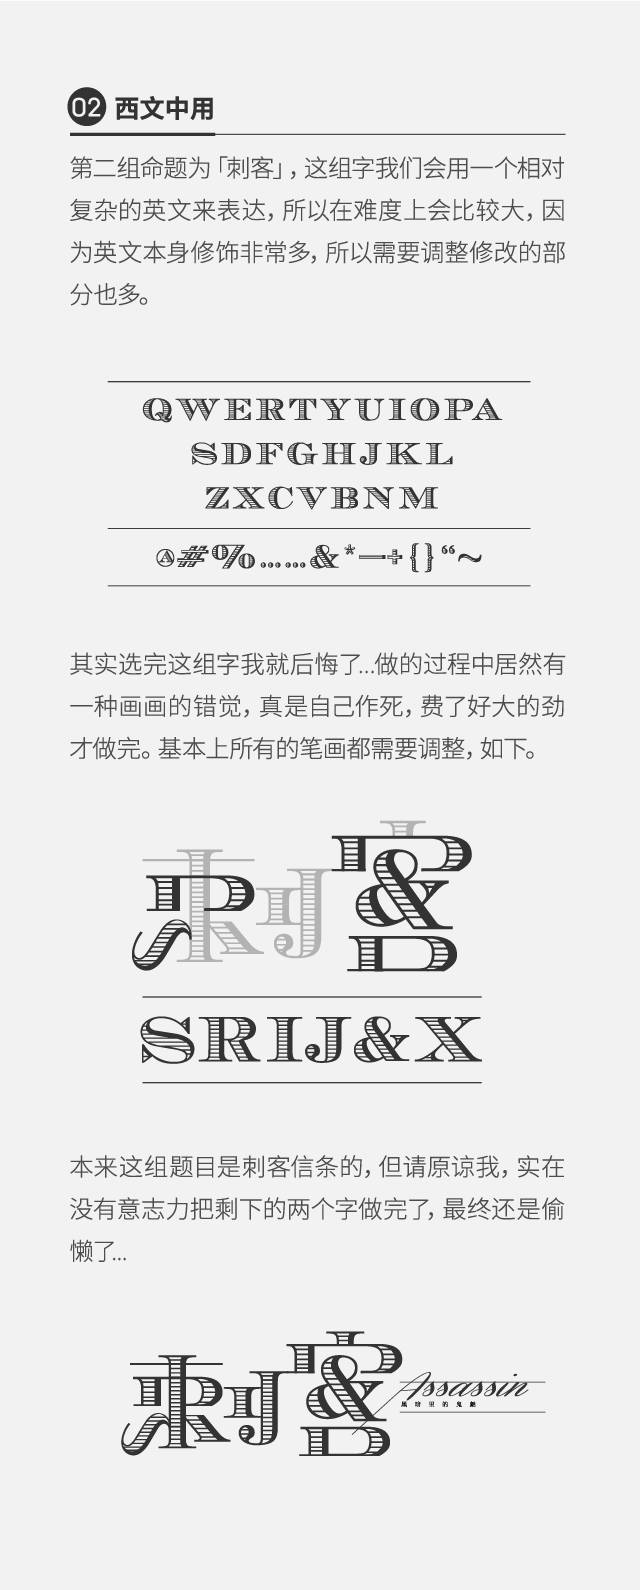 【Logo Talk】How to imitate English fonts to design Chinese?